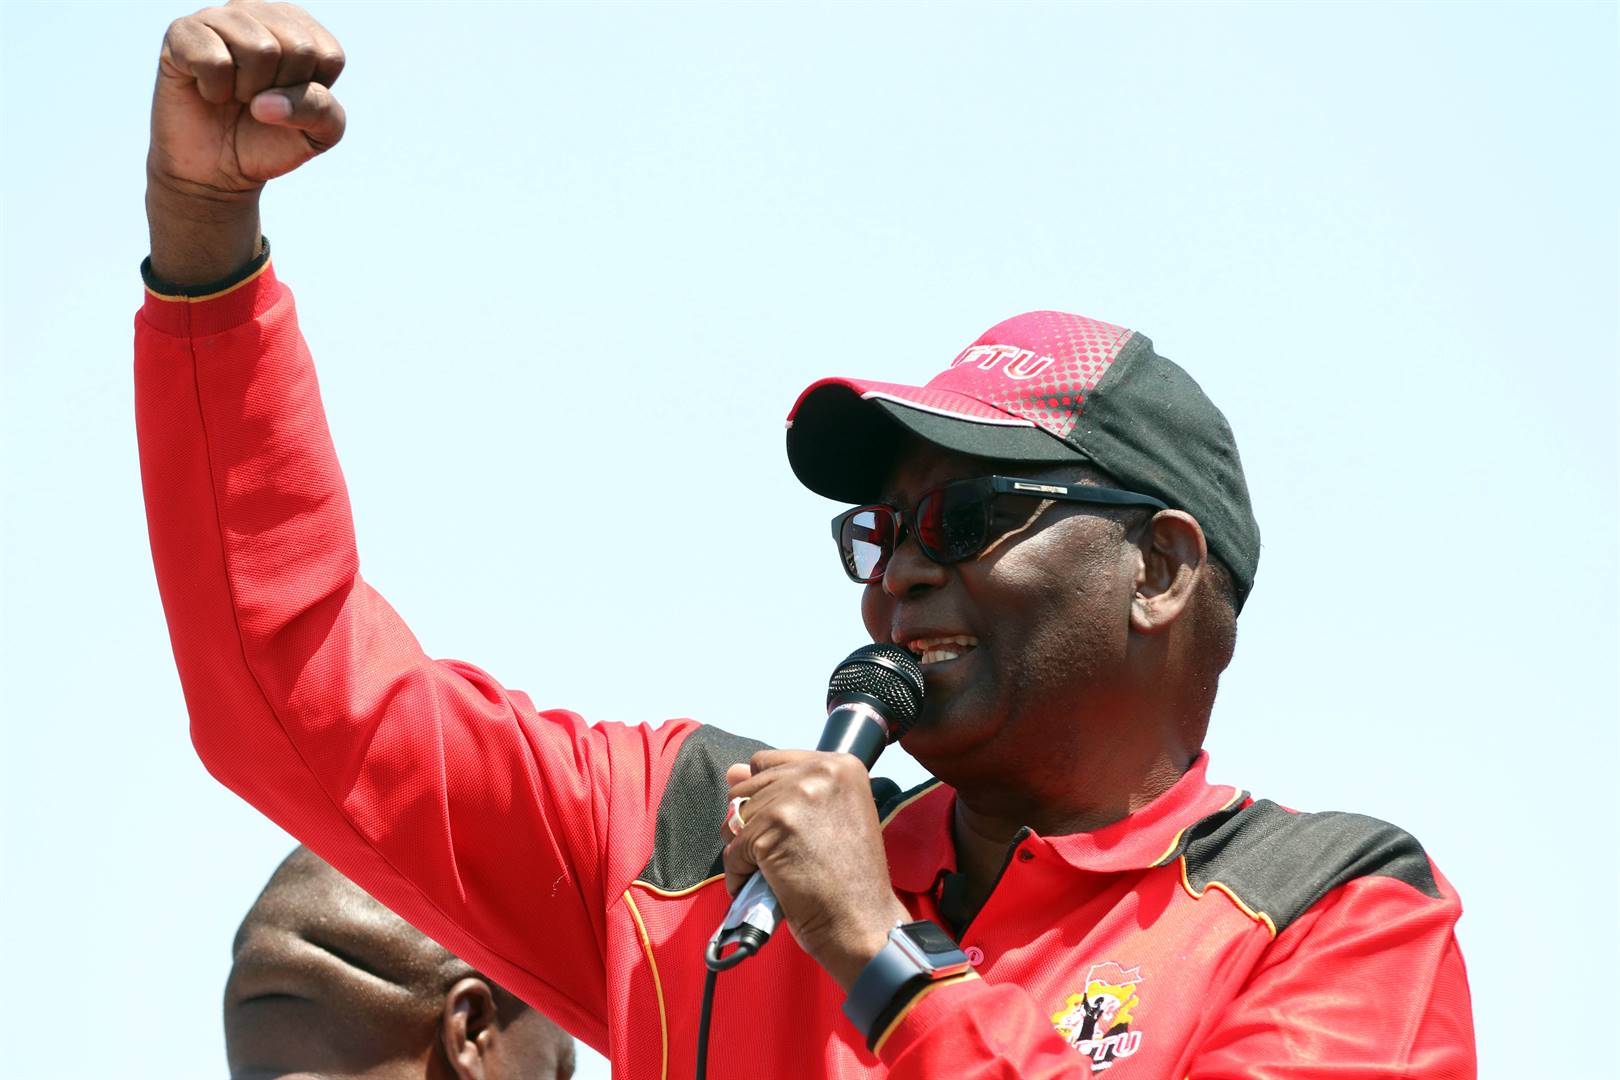 Saftu general secretary Zwelinzima Vavi has expressed concerns about what he viewed as the ploy against the federation by its biggest affiliate by trying to remove its top leaders. Photo: Gallo Images